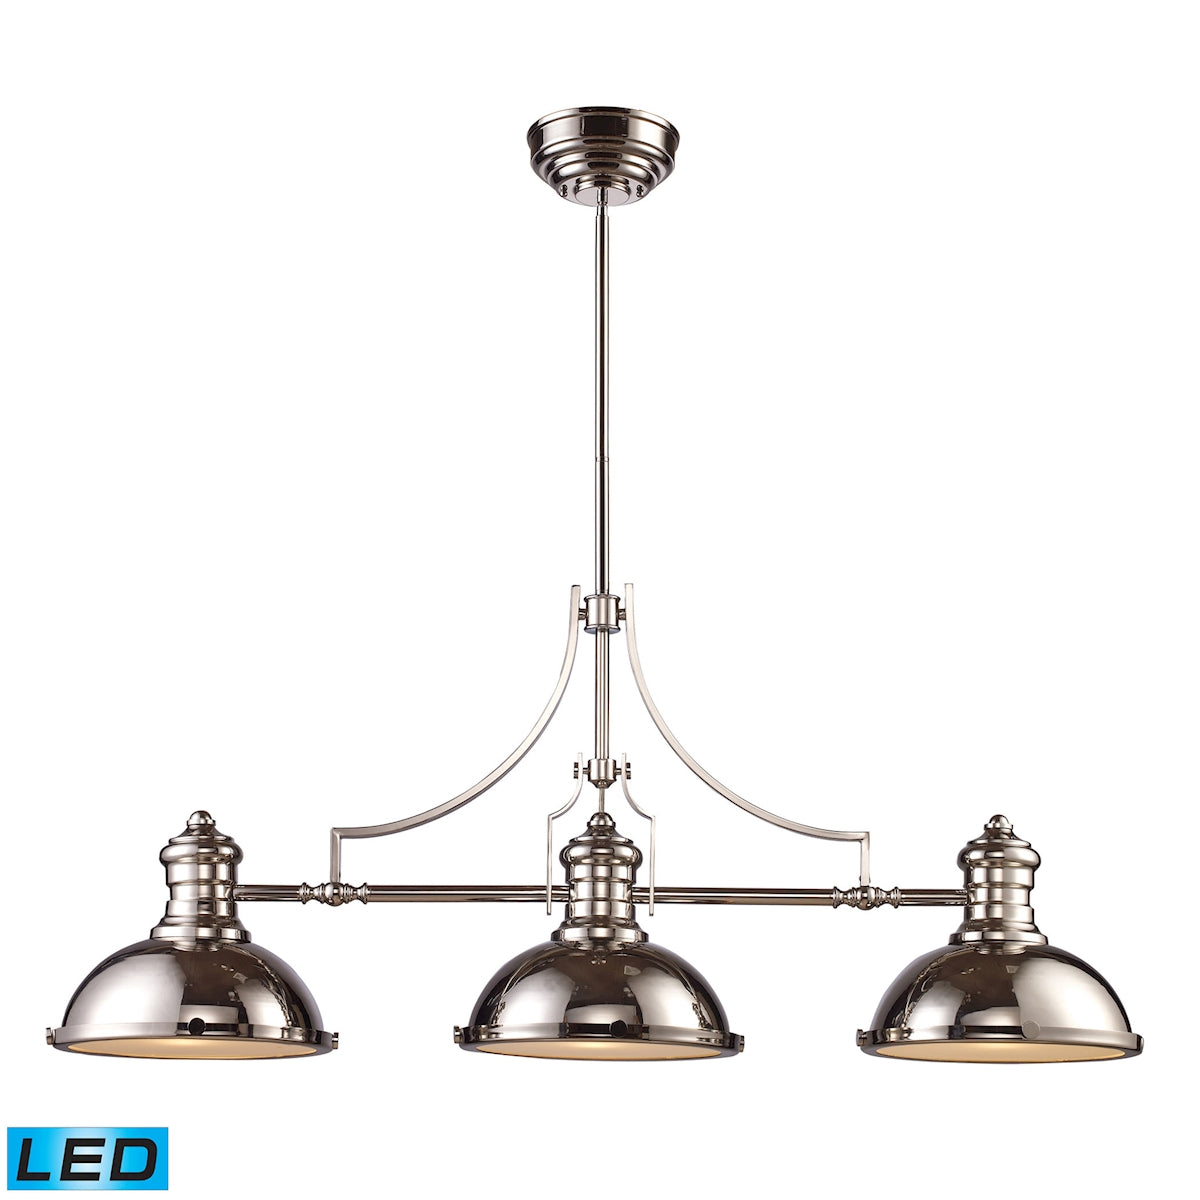 Chadwick 3-Light Island Light in Polished Nickel with Matching Shades - Includes LED Bulbs